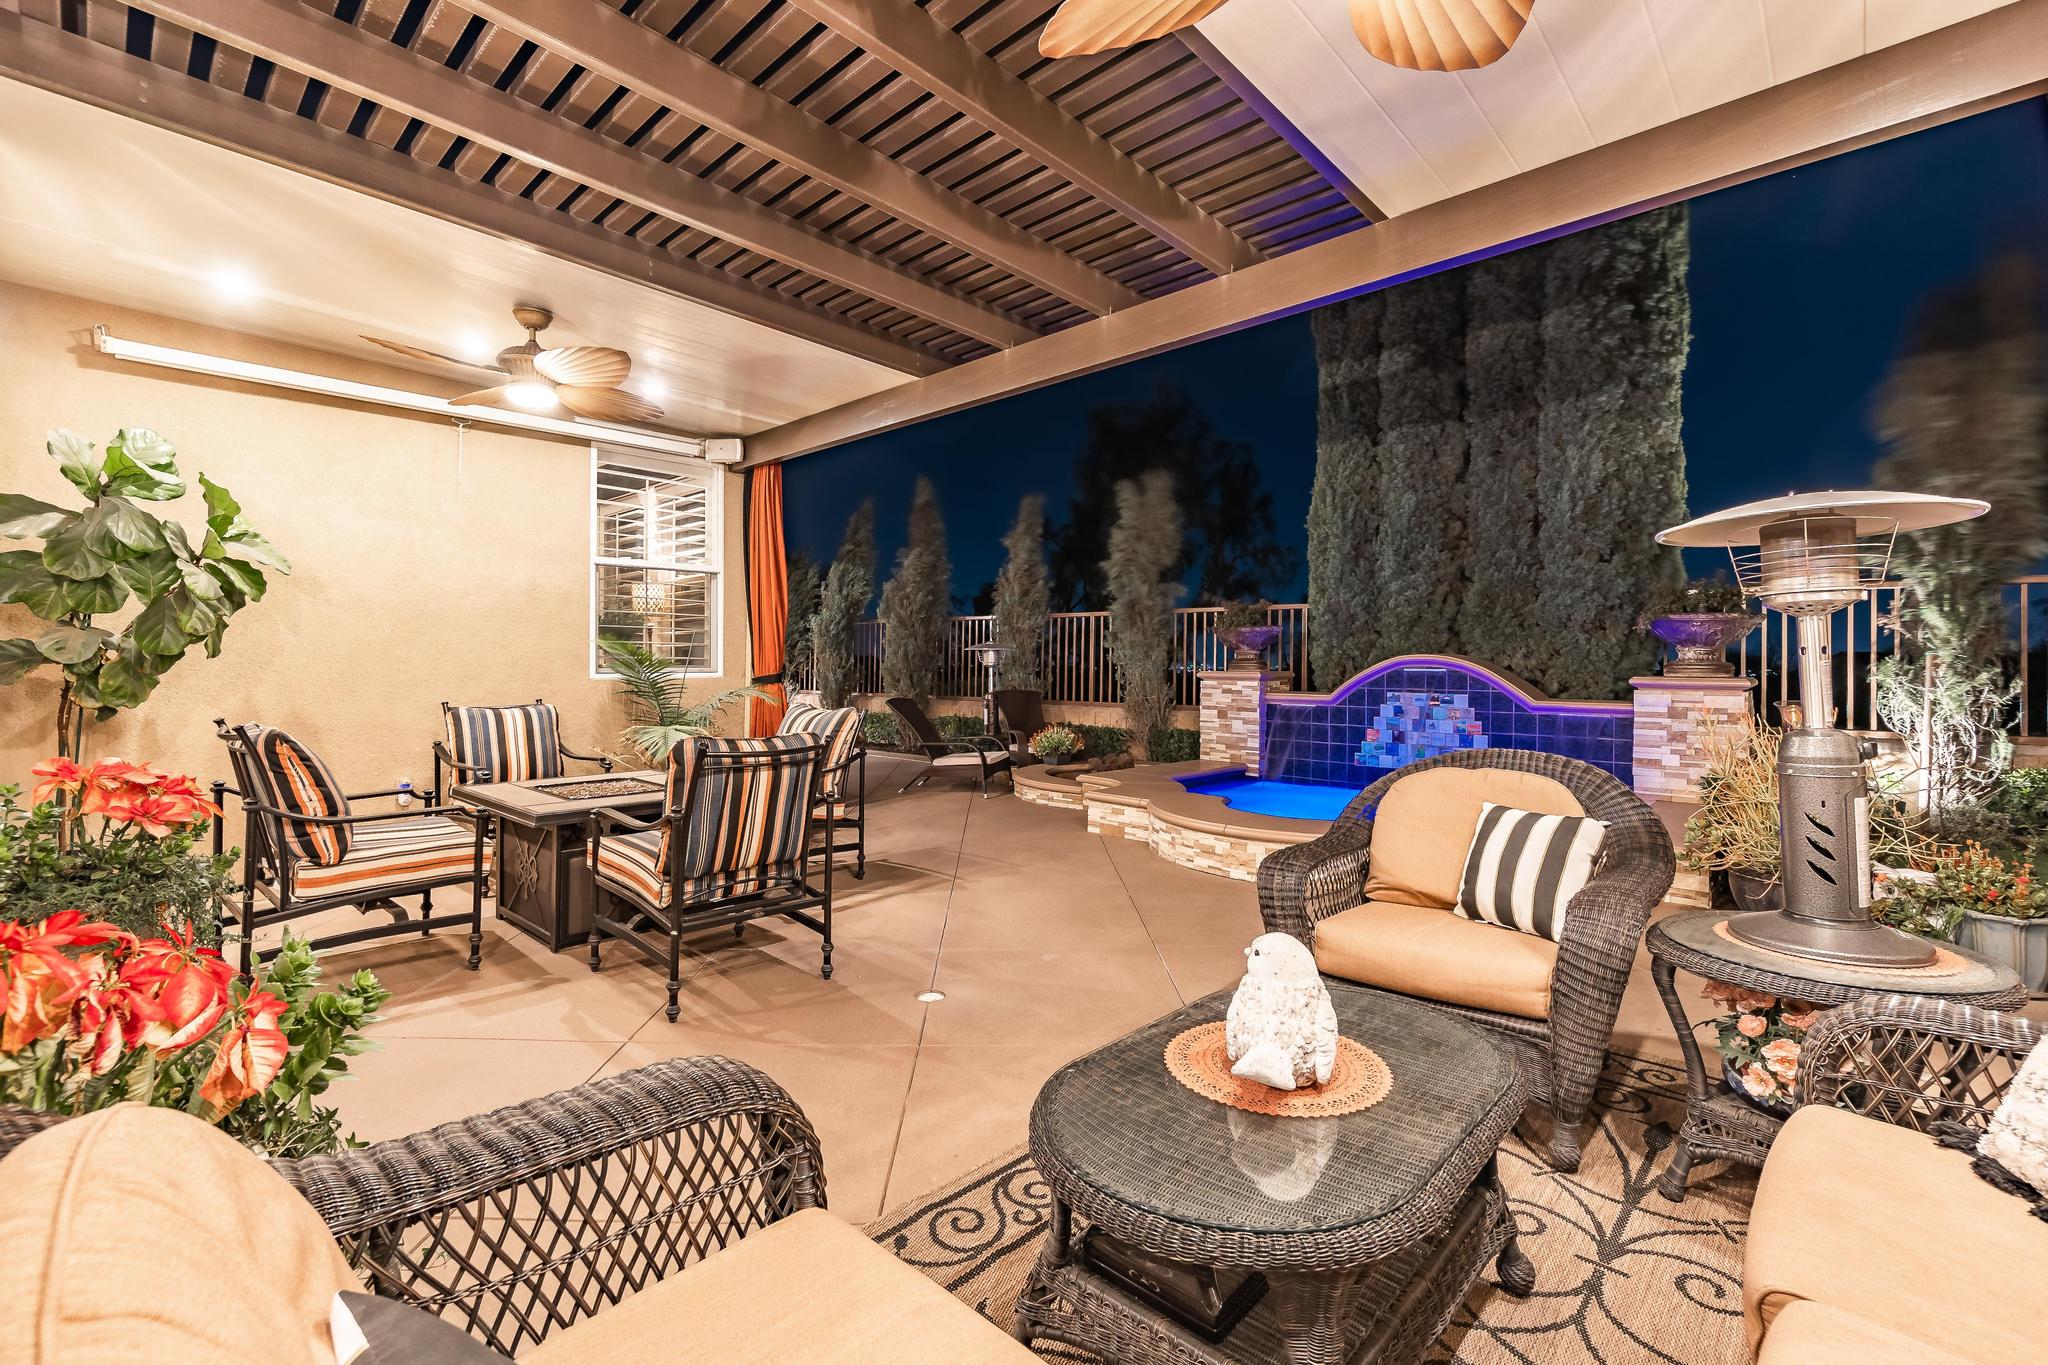 Tuscan-Inspired Olinda Ranch Villa – 467 Tangerine Place, Brea, CA 92823 - Patio View of the Furniture & Pool